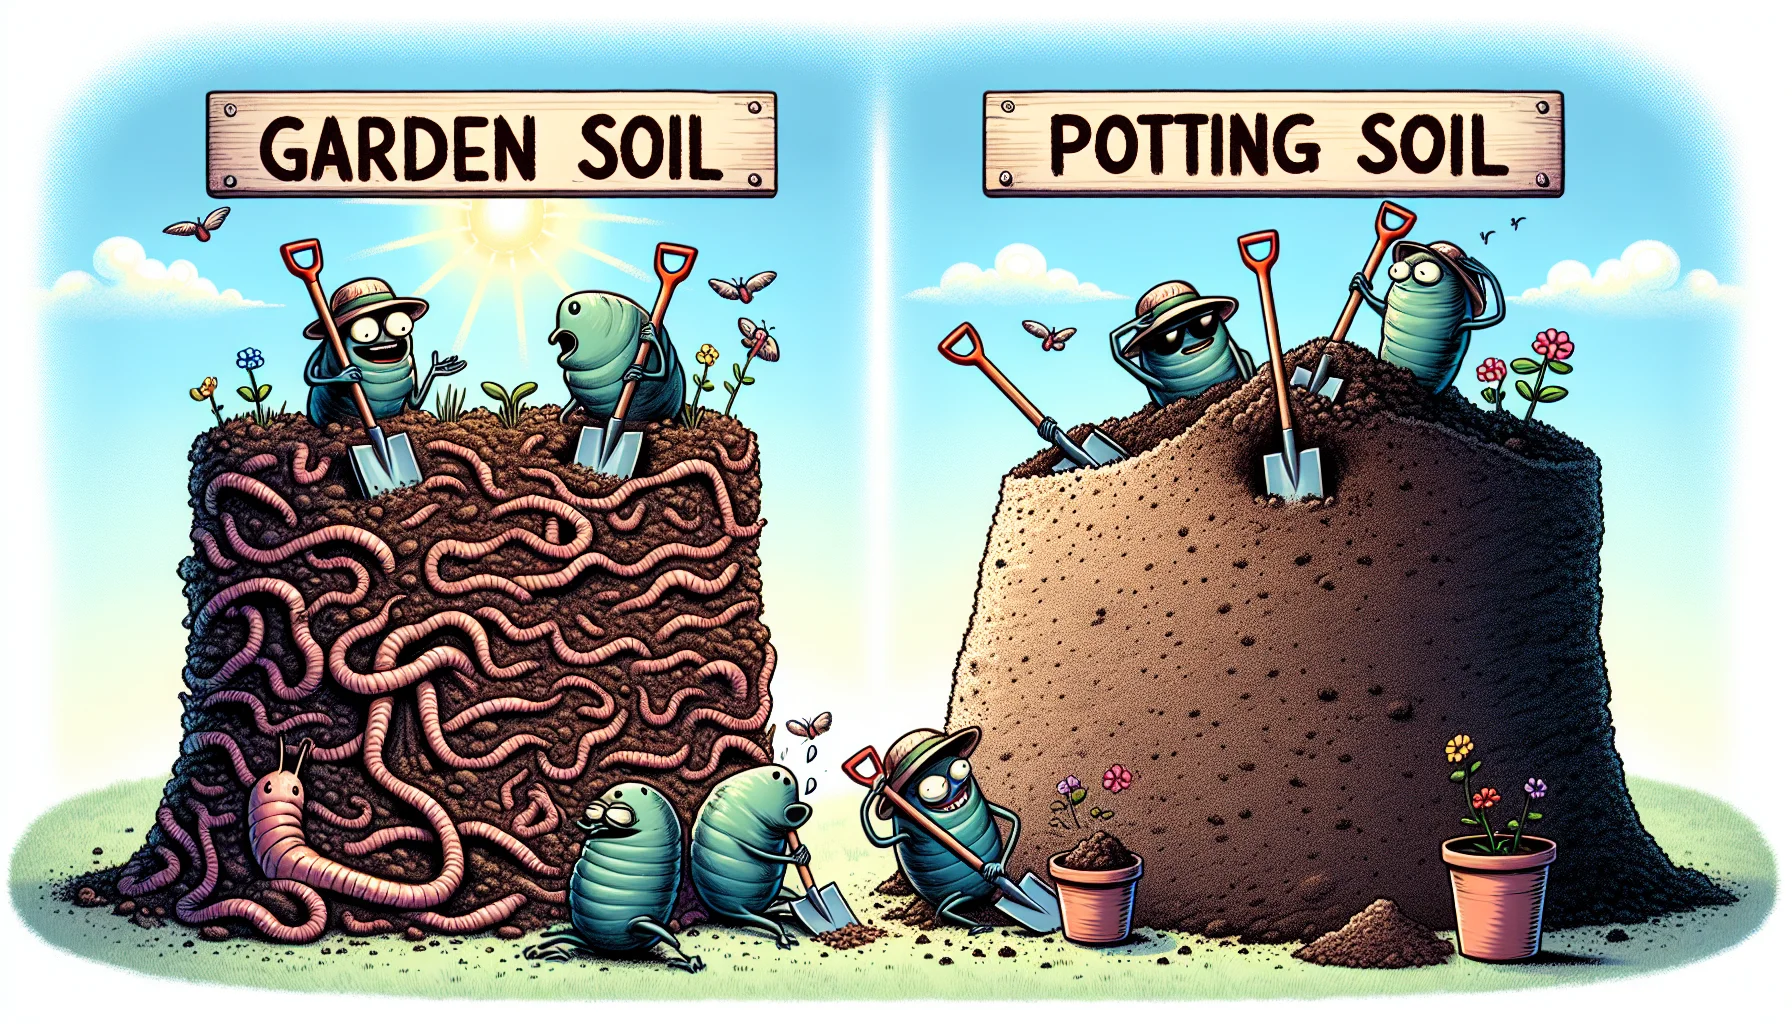 Generate an image depicting a humorous scene that highlights the differences between garden soil and potting soil. Picture two distinct piles of soil, one labeled as 'Garden Soil' looking robust with visible earthworms and small plants sprouting, and the other as 'Potting Soil' showcasing a finer, lighter, and airy consistency. The scene making it funny could be a trio of caricature bugs with gardening hats, all flabbergasted trying to shovel the garden soil while it's easier to maneuver the potting soil. Add subtle details such as sun shining bright overhead with chirping birds to encapsulate the joys of gardening.